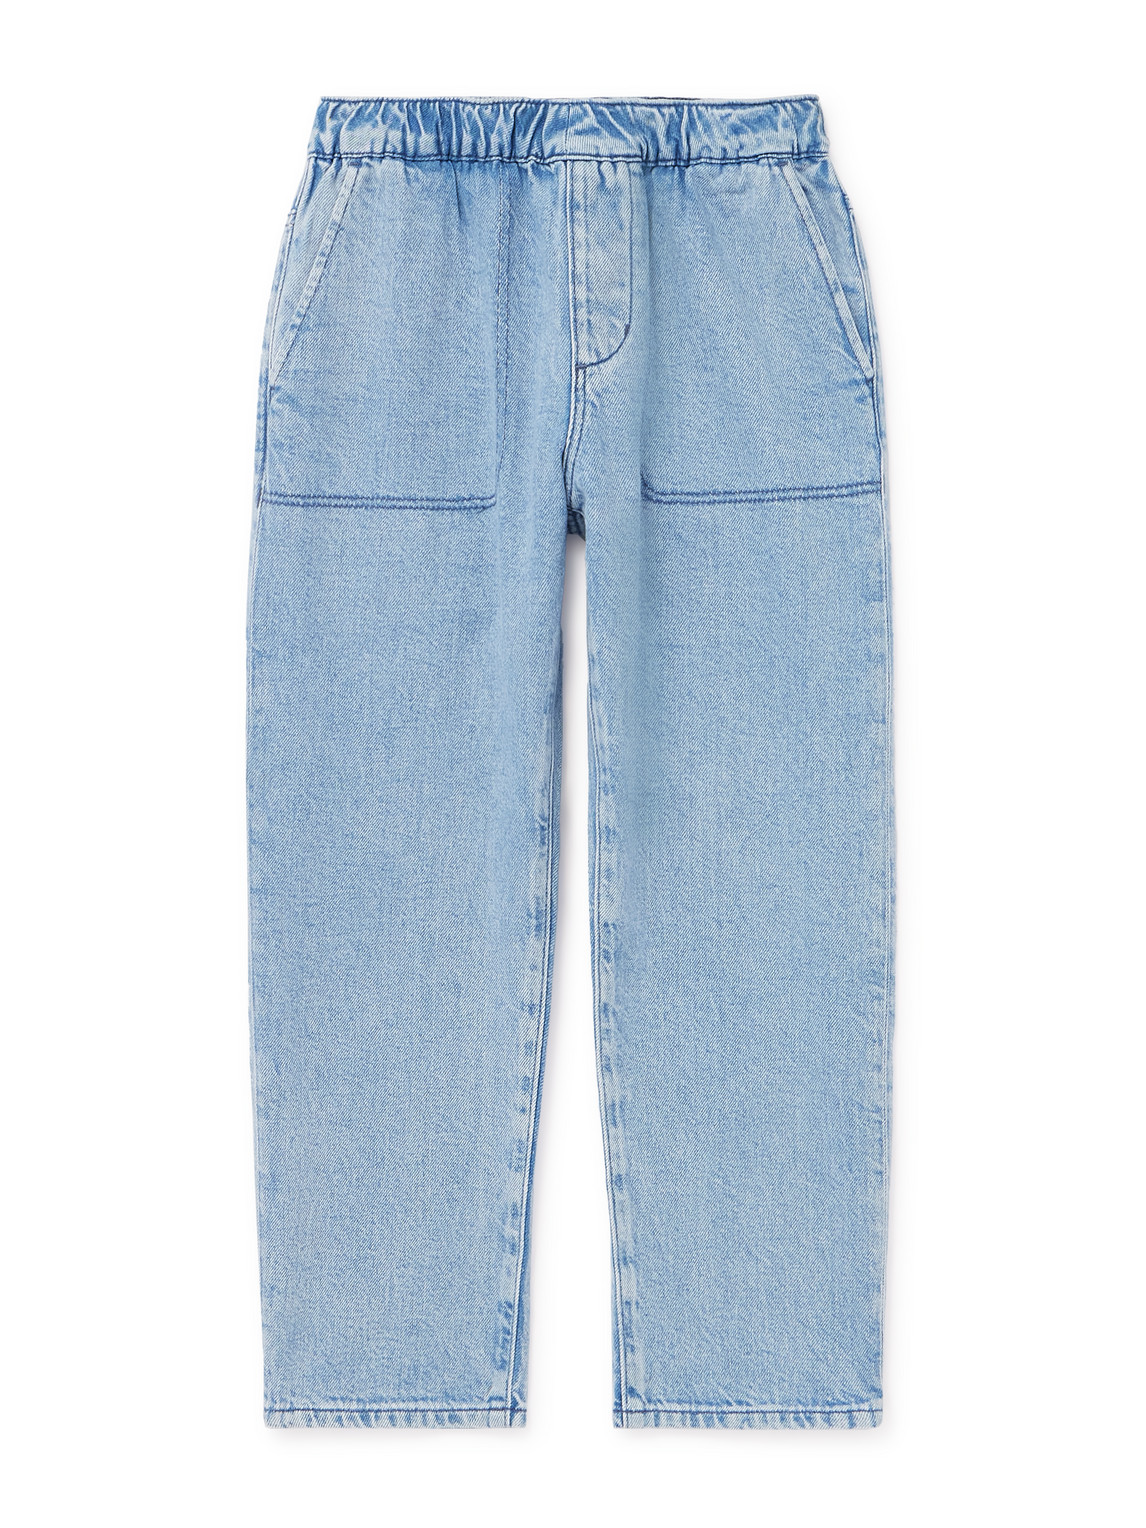 Arket Todd Jeans In Blue